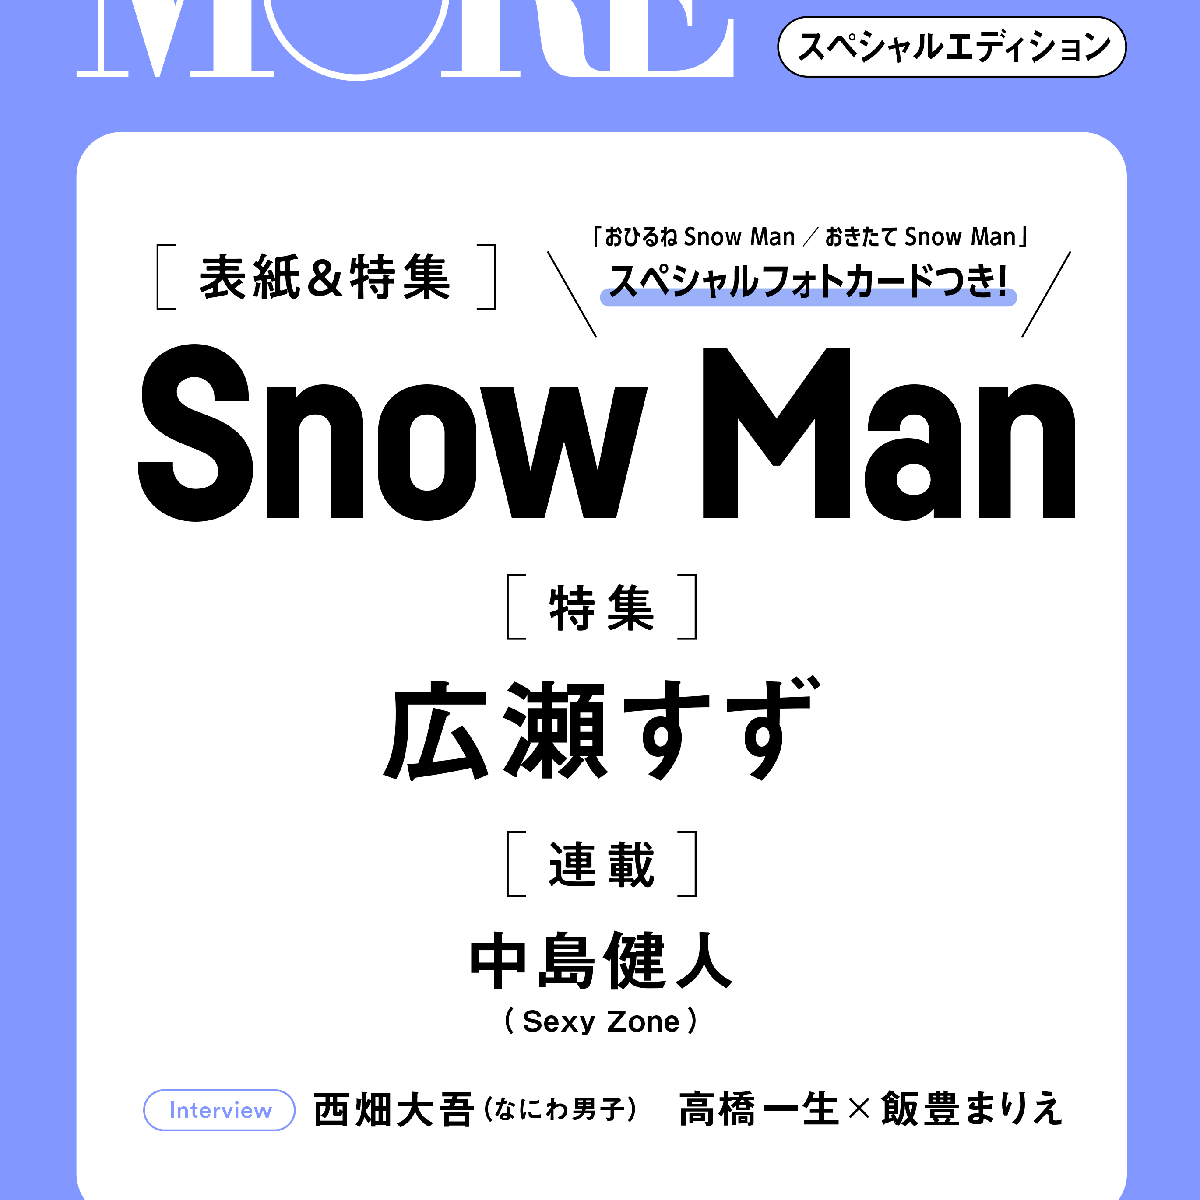 【To Snow Man fans！】We now offer shipping to customers in overseas! ＜MORE July issue, Snow Man on cover  ＞　